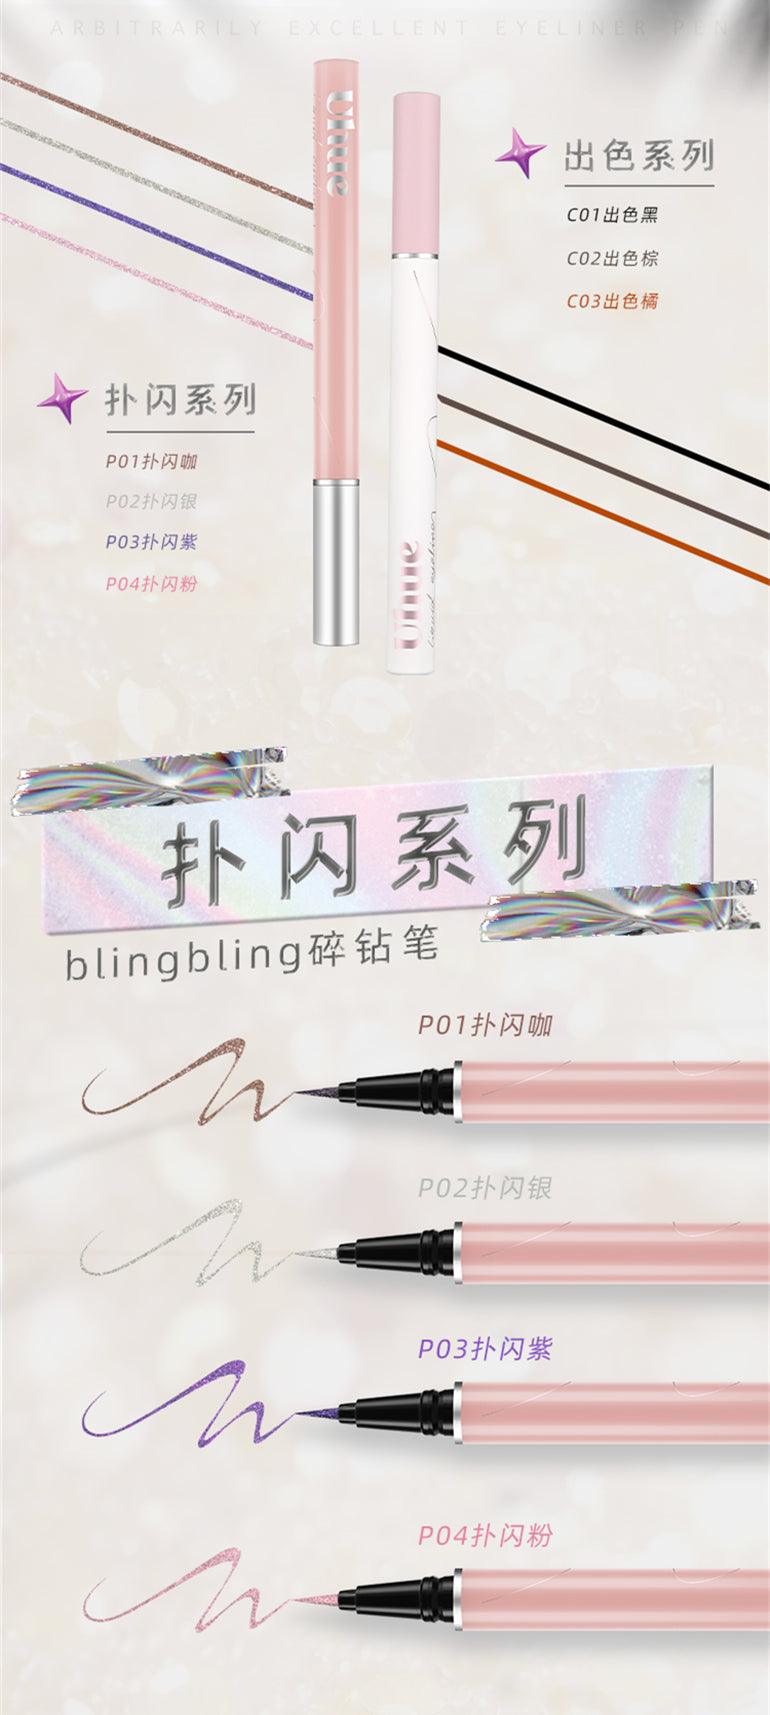 Uhue Arbitrarily Excellent Eyeliner Pen UH006 - Chic Decent